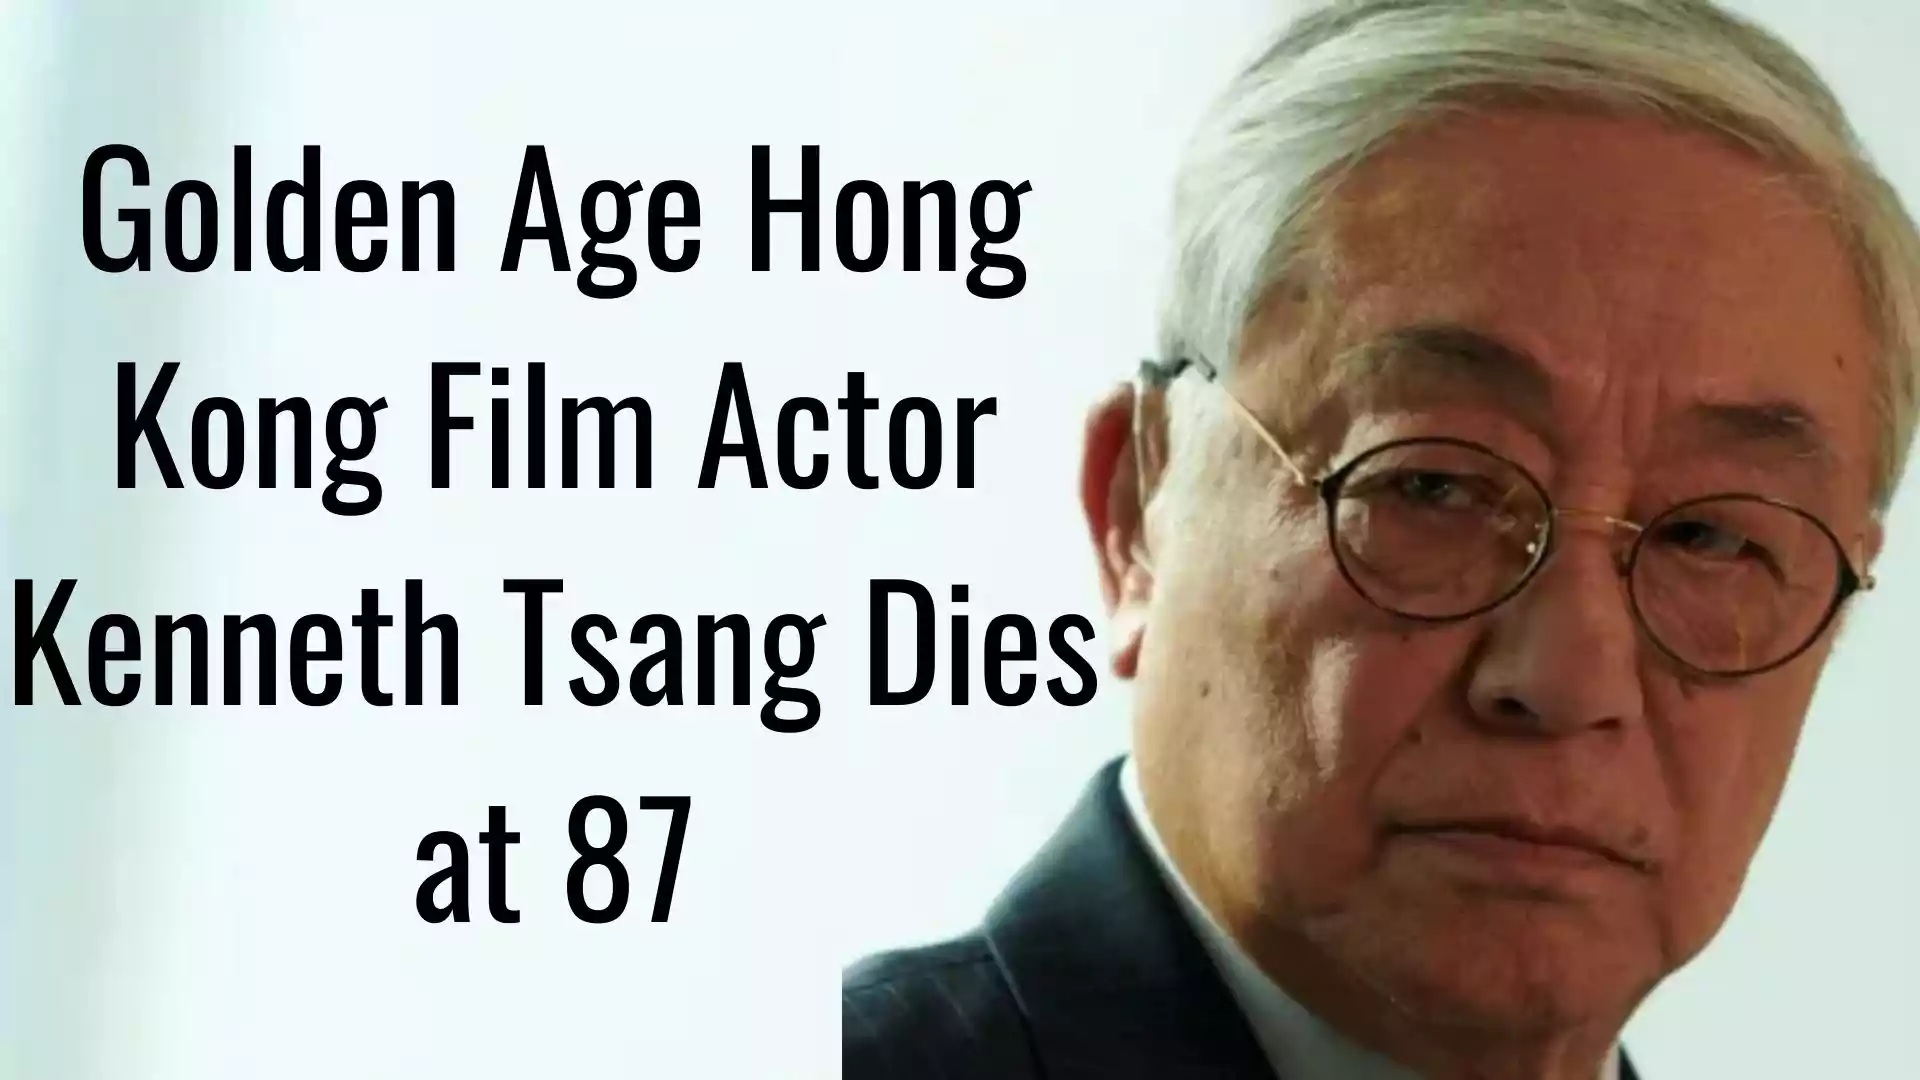 Golden Age Hong Kong Film Actor Kenneth Tsang ( 曾江) Dies at 87. Hong kong actor died 2022. Kenneth Tsang found dead at a hotel.